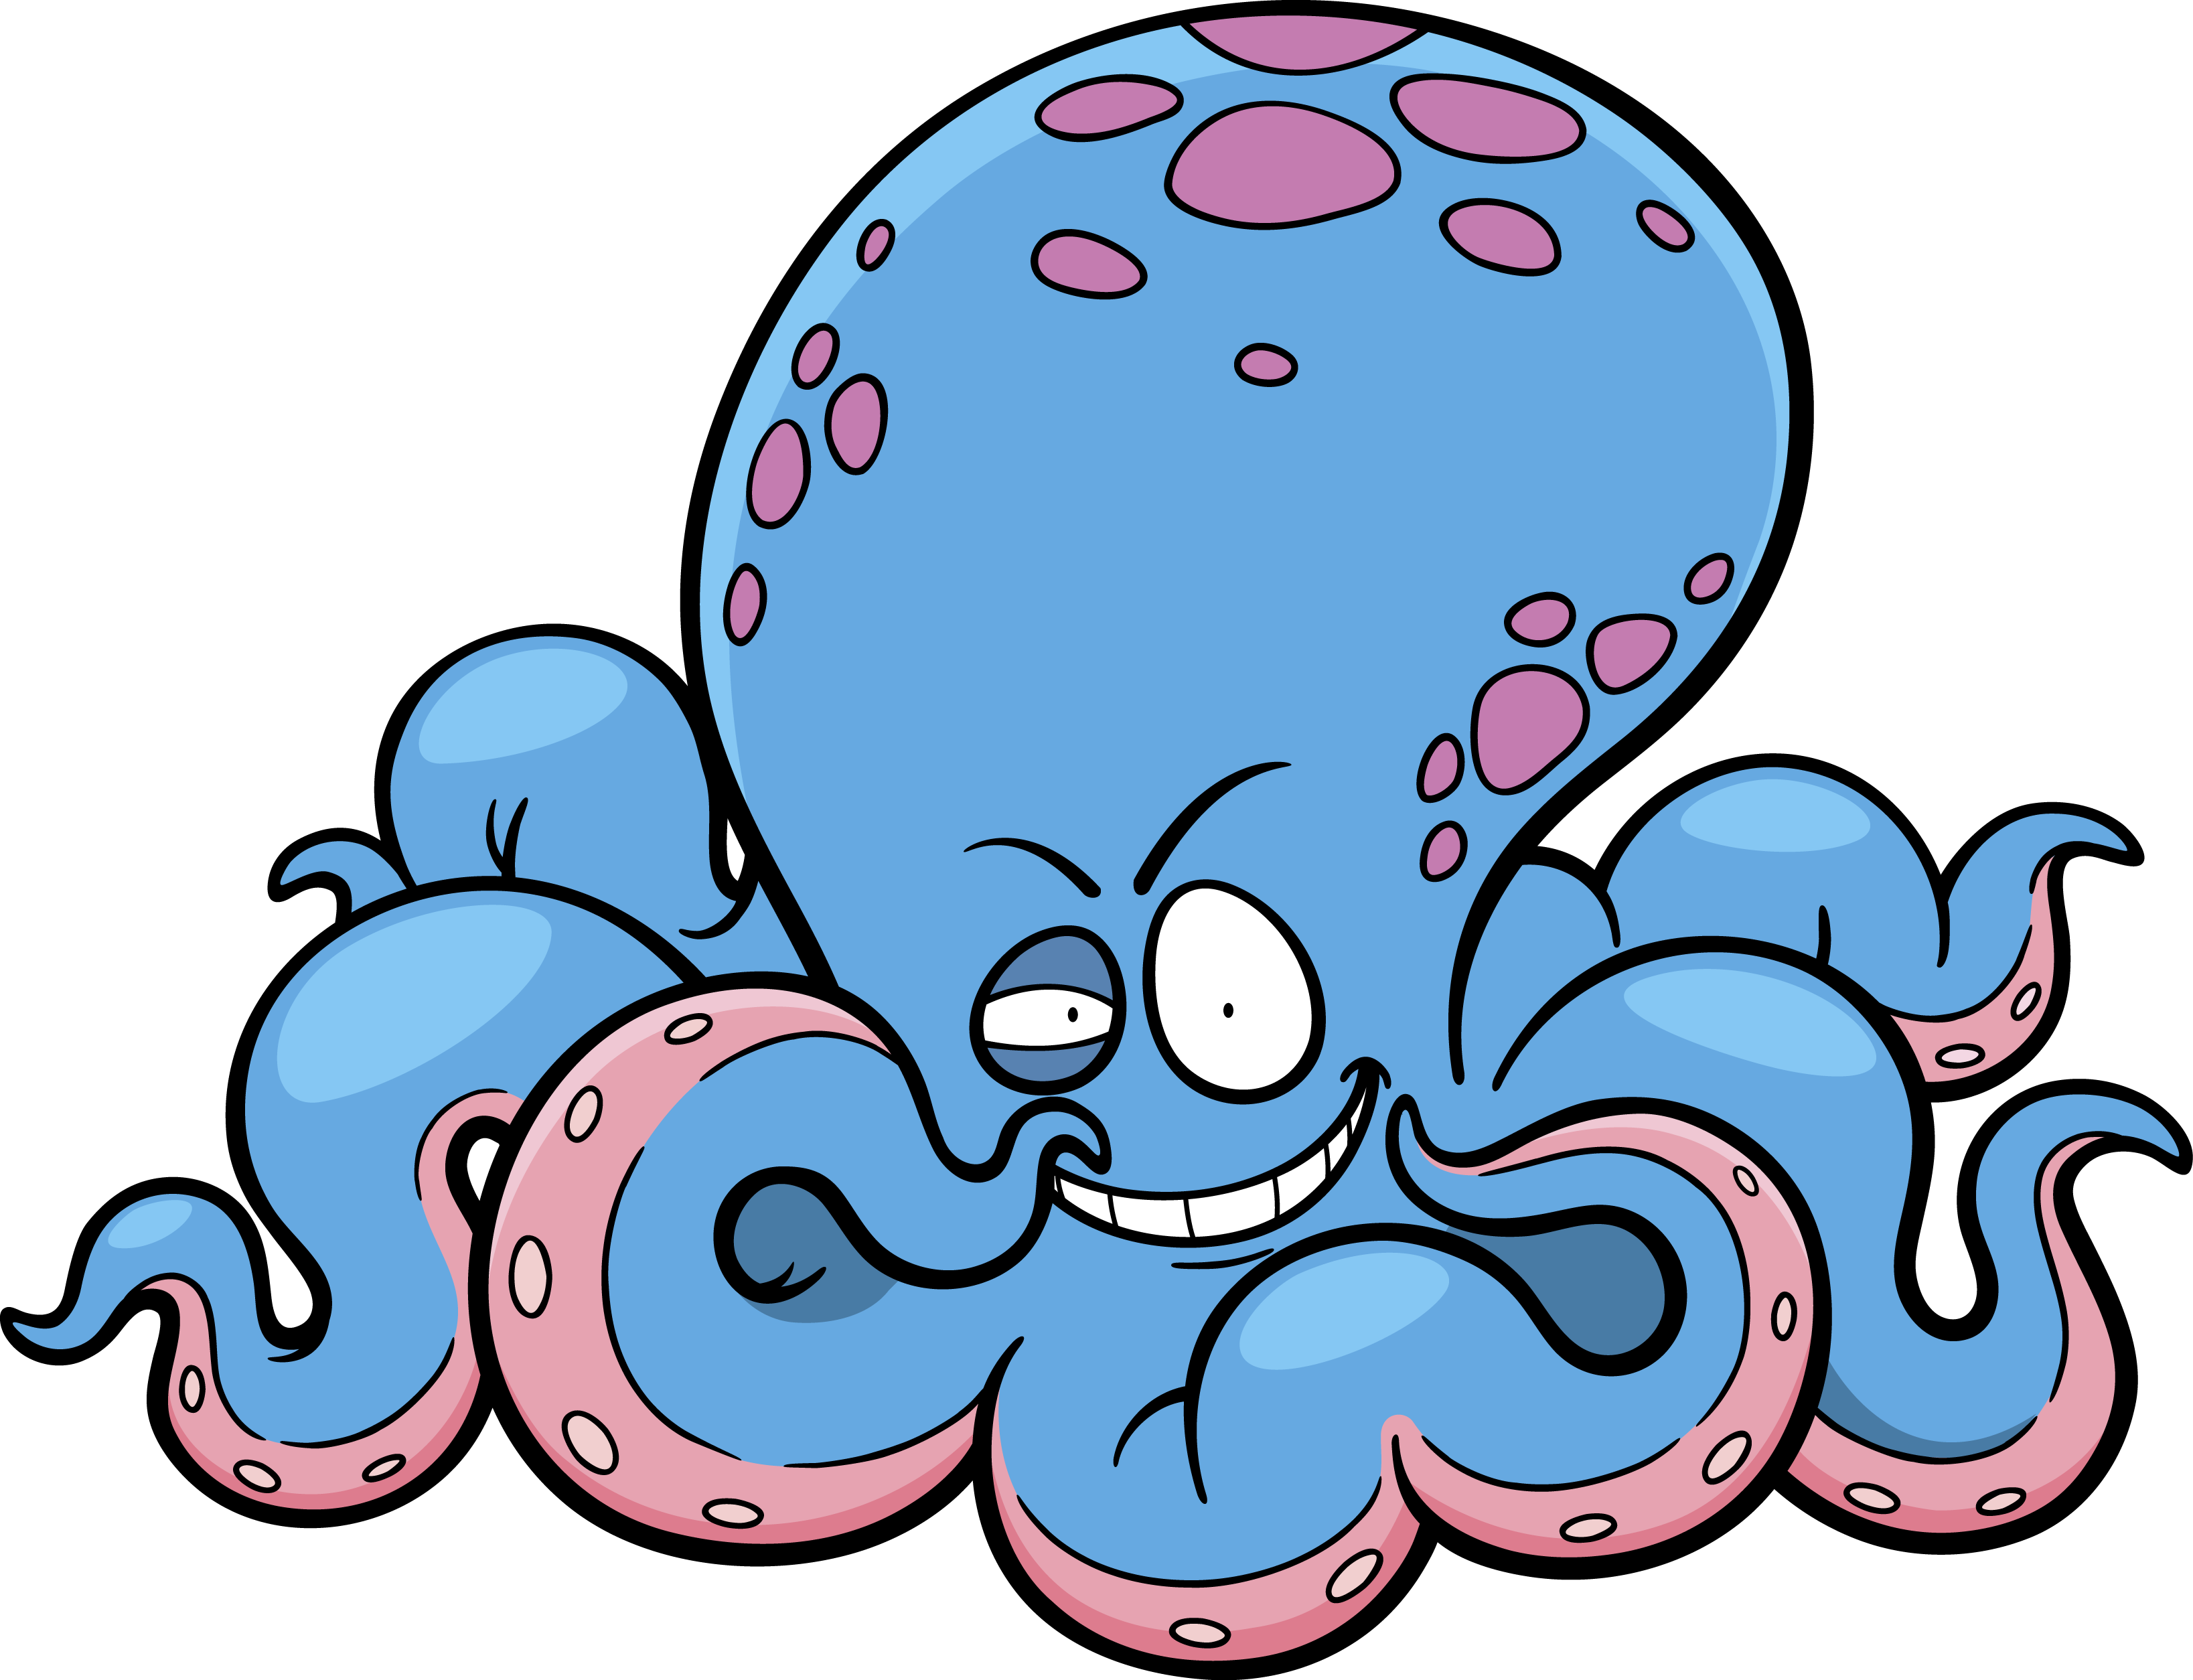 Octopus clipart teal, Octopus teal Transparent FREE for download on